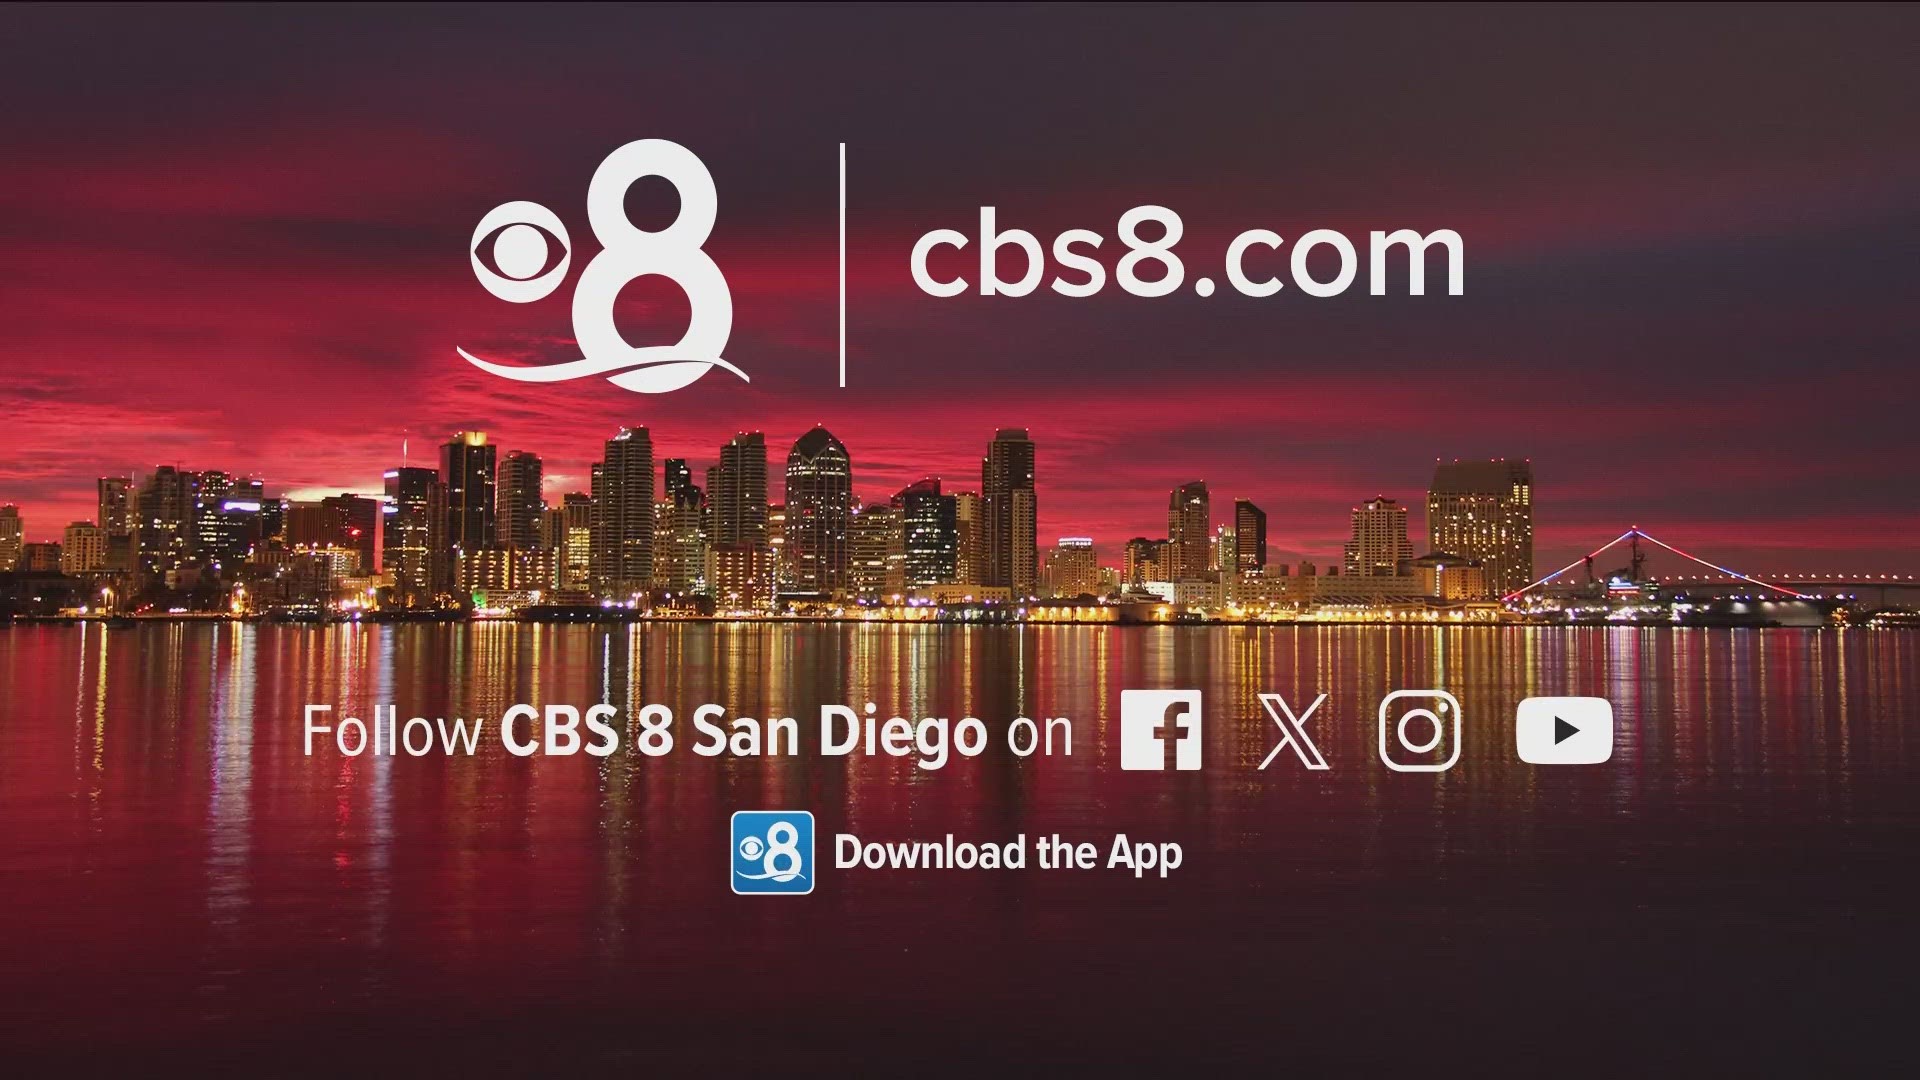 Today's top stories from CBS 8 San Diego on December 26 at 6 a.m.